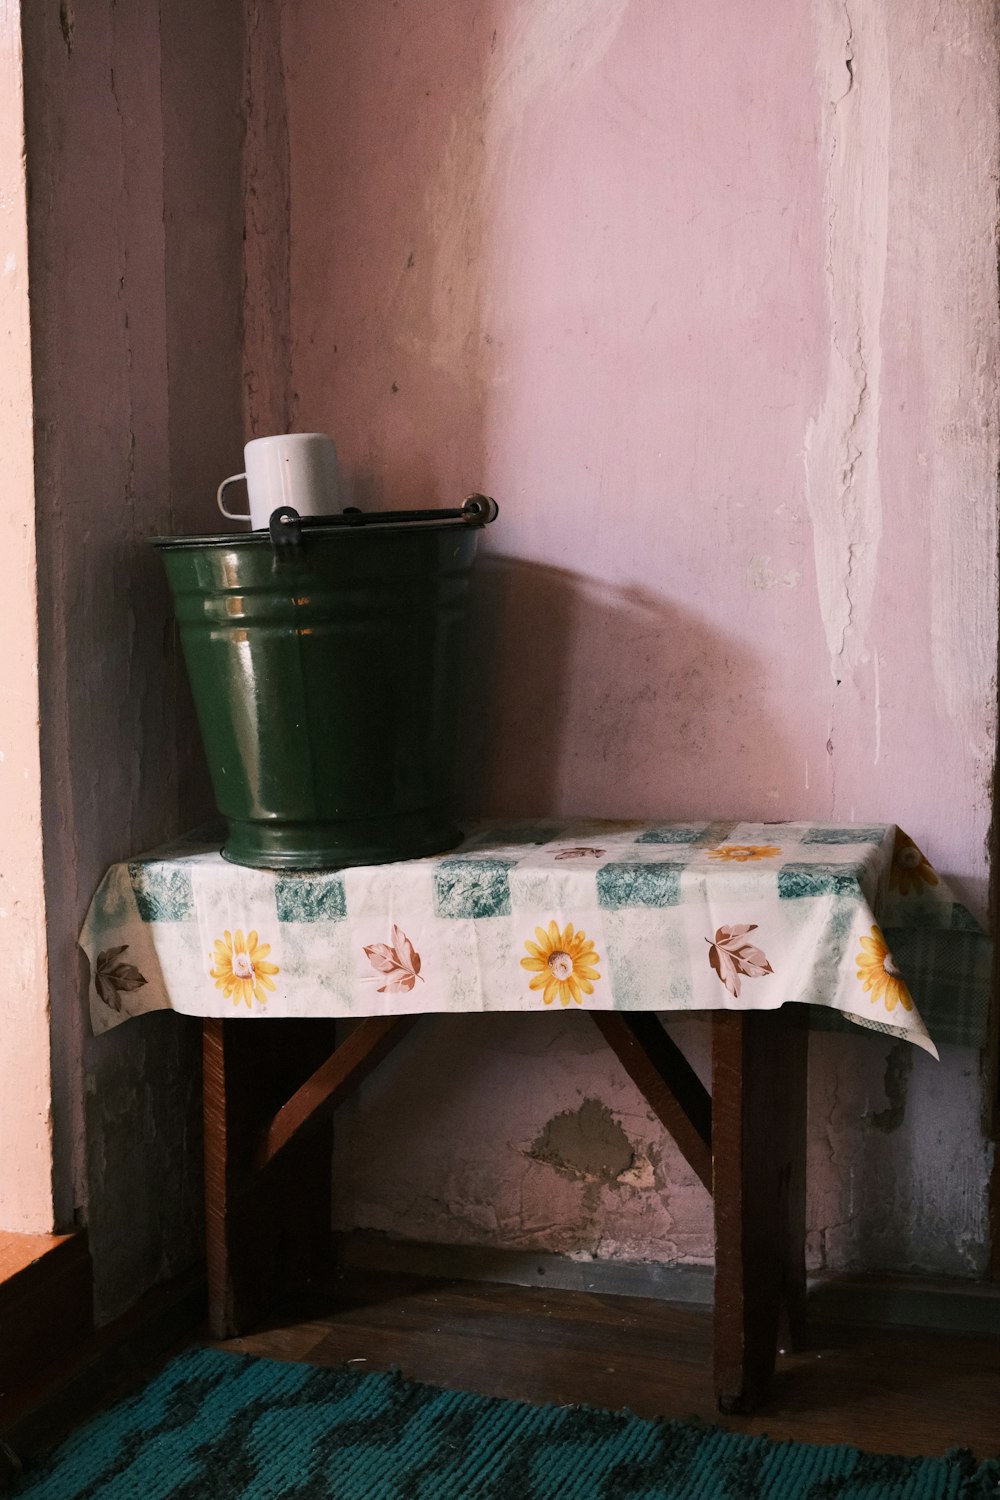 a green bucket sitting on top of a wooden bench